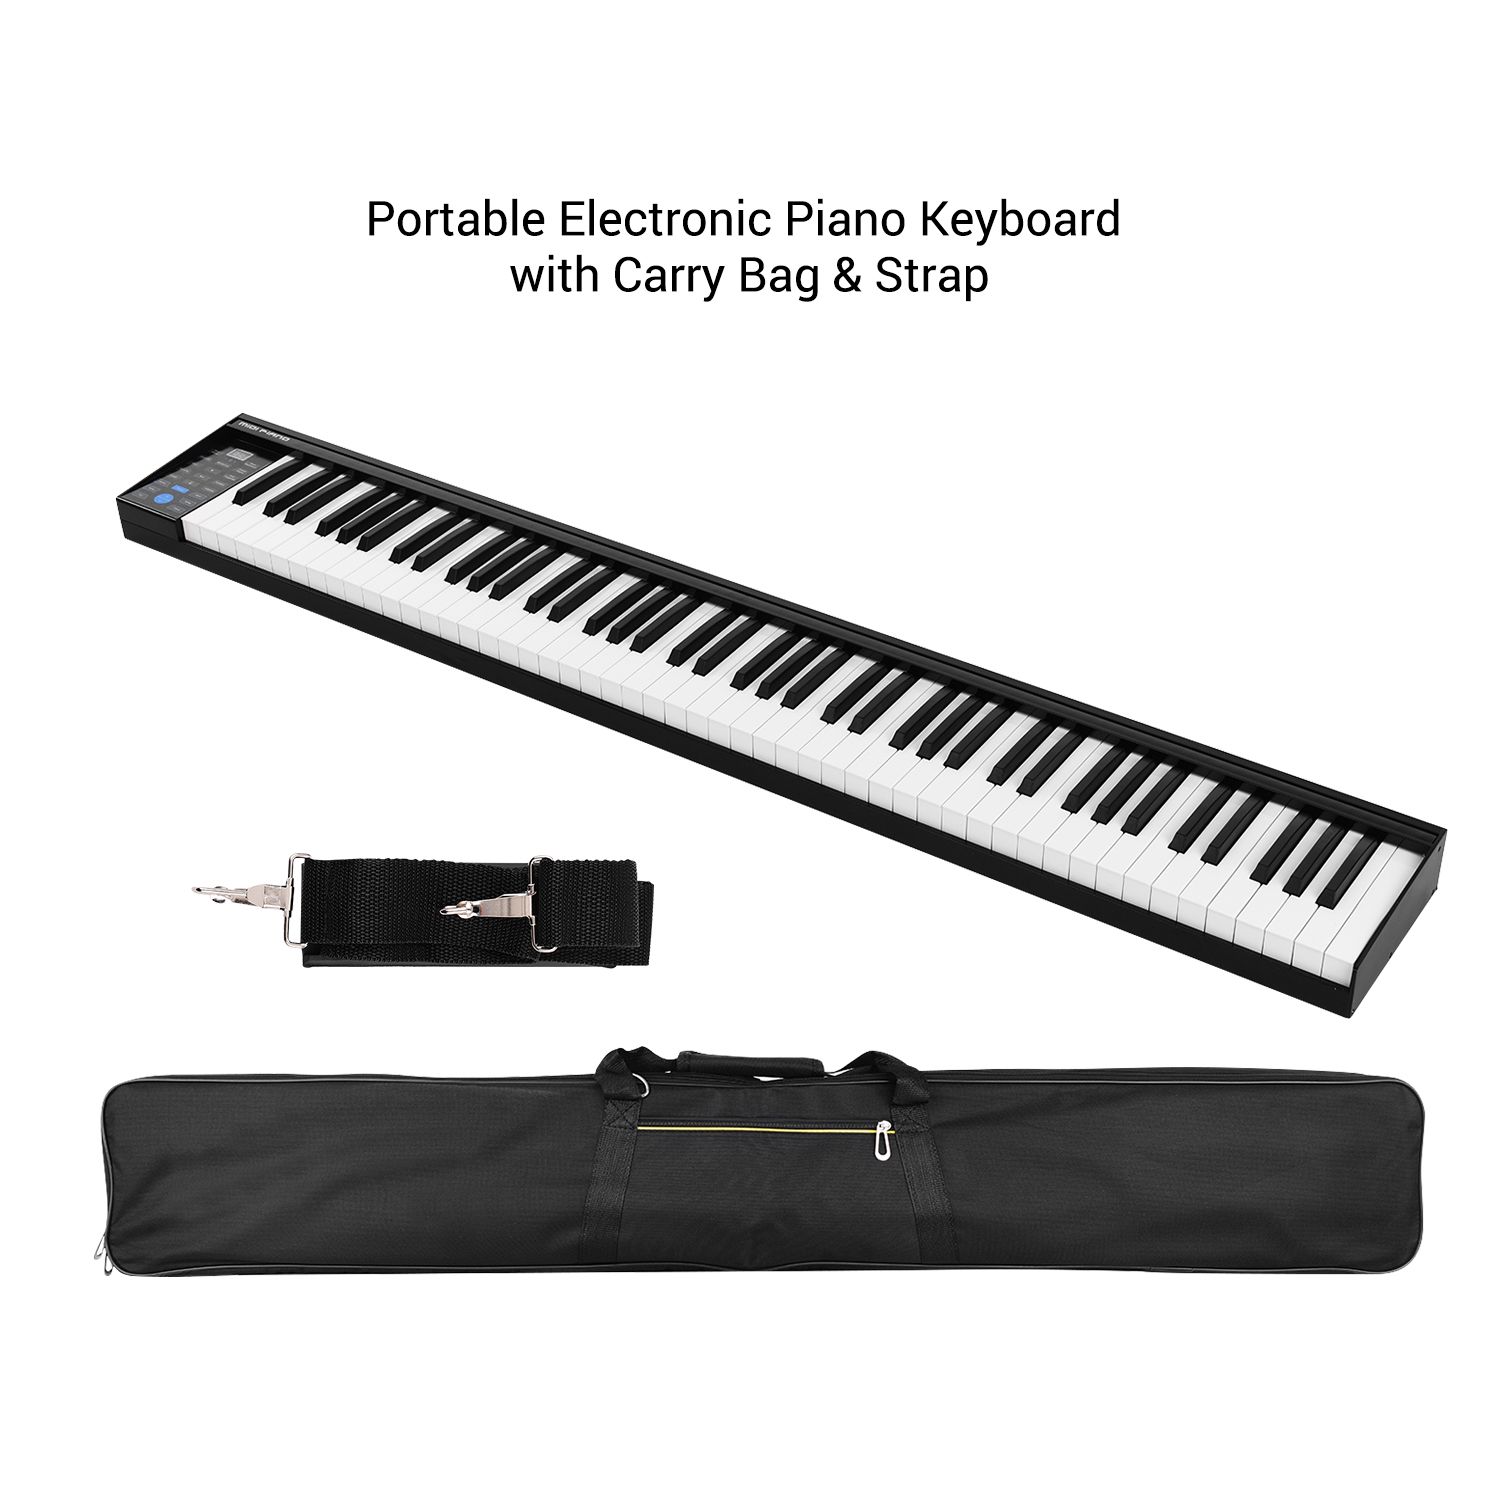 88 Keys Digital Electronic Piano Keyboard MIDI Output Built-in Stereo Speakers Light Strip with 400 Tones 128 Rhythms 80 Songs